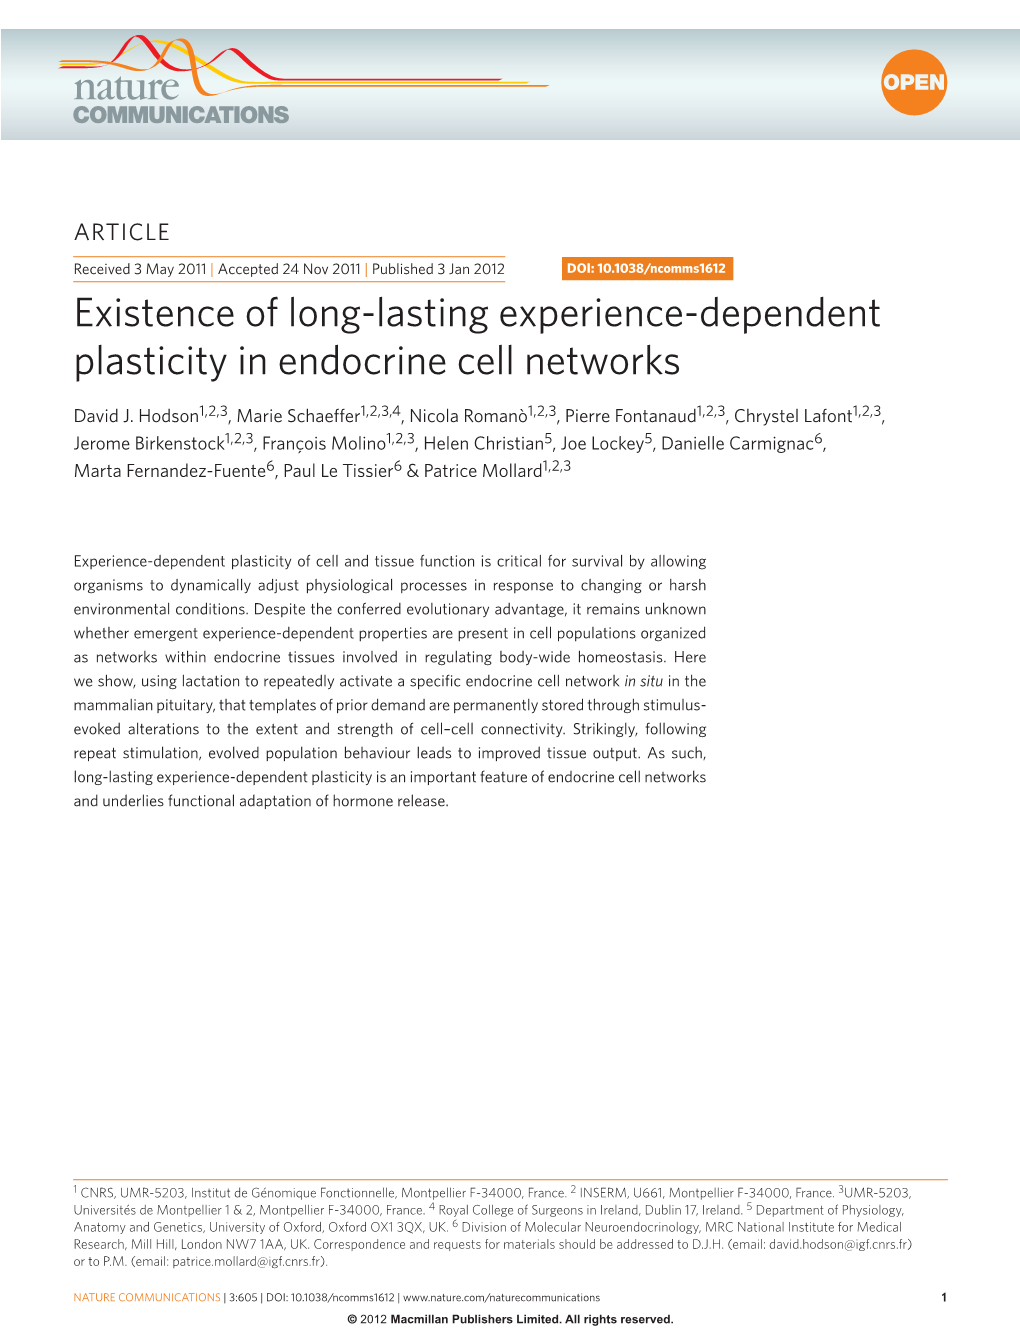 Existence of Long-Lasting Experience-Dependent Plasticity in Endocrine Cell Networks